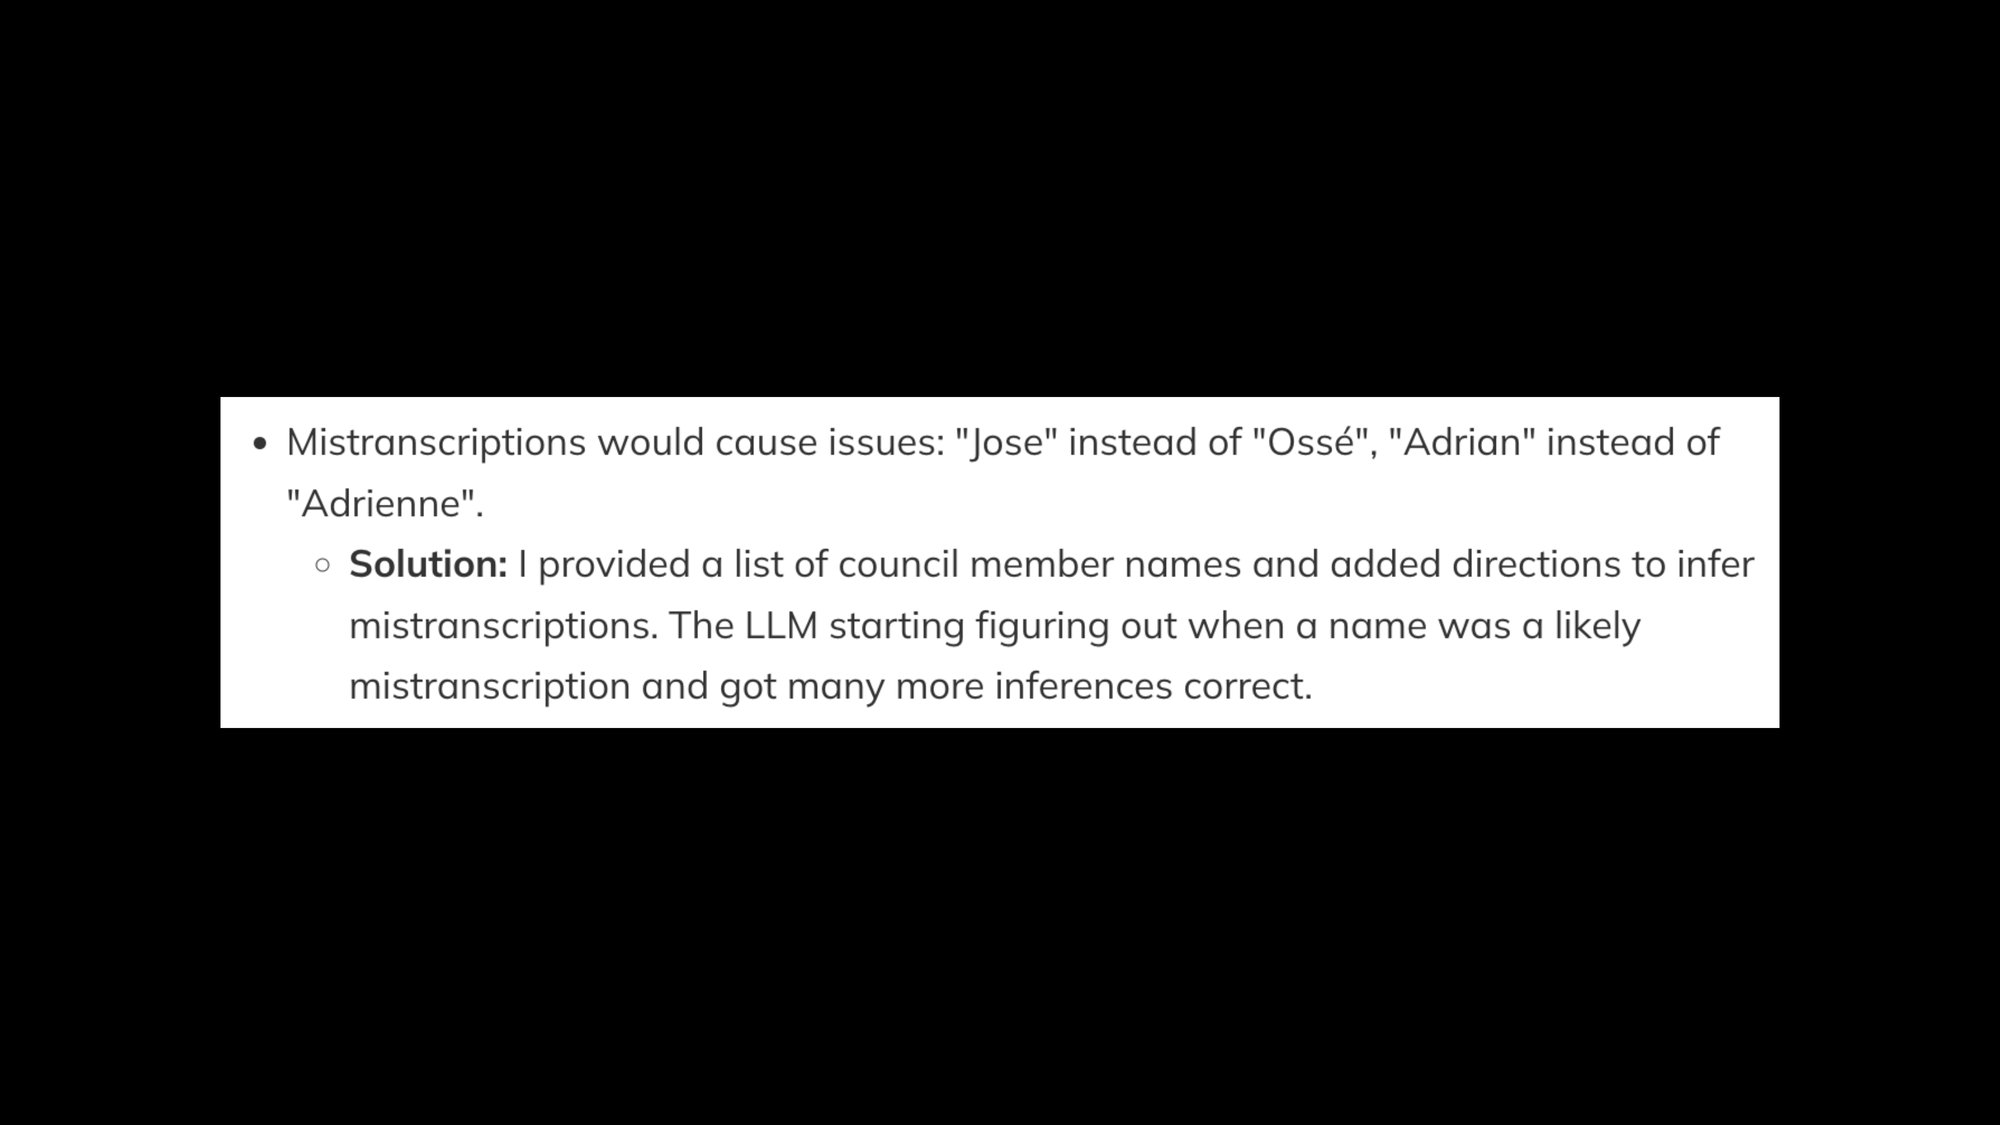 Mistranscriptions would cause issues: Jose instead of Ossé, Adrian instead of Adrienne. Solution: I provided a list of council member names and added directions to infer mistranscriptions. The LLM starting figuring out when a name was a likely mistranscription and got many more inferences correct.